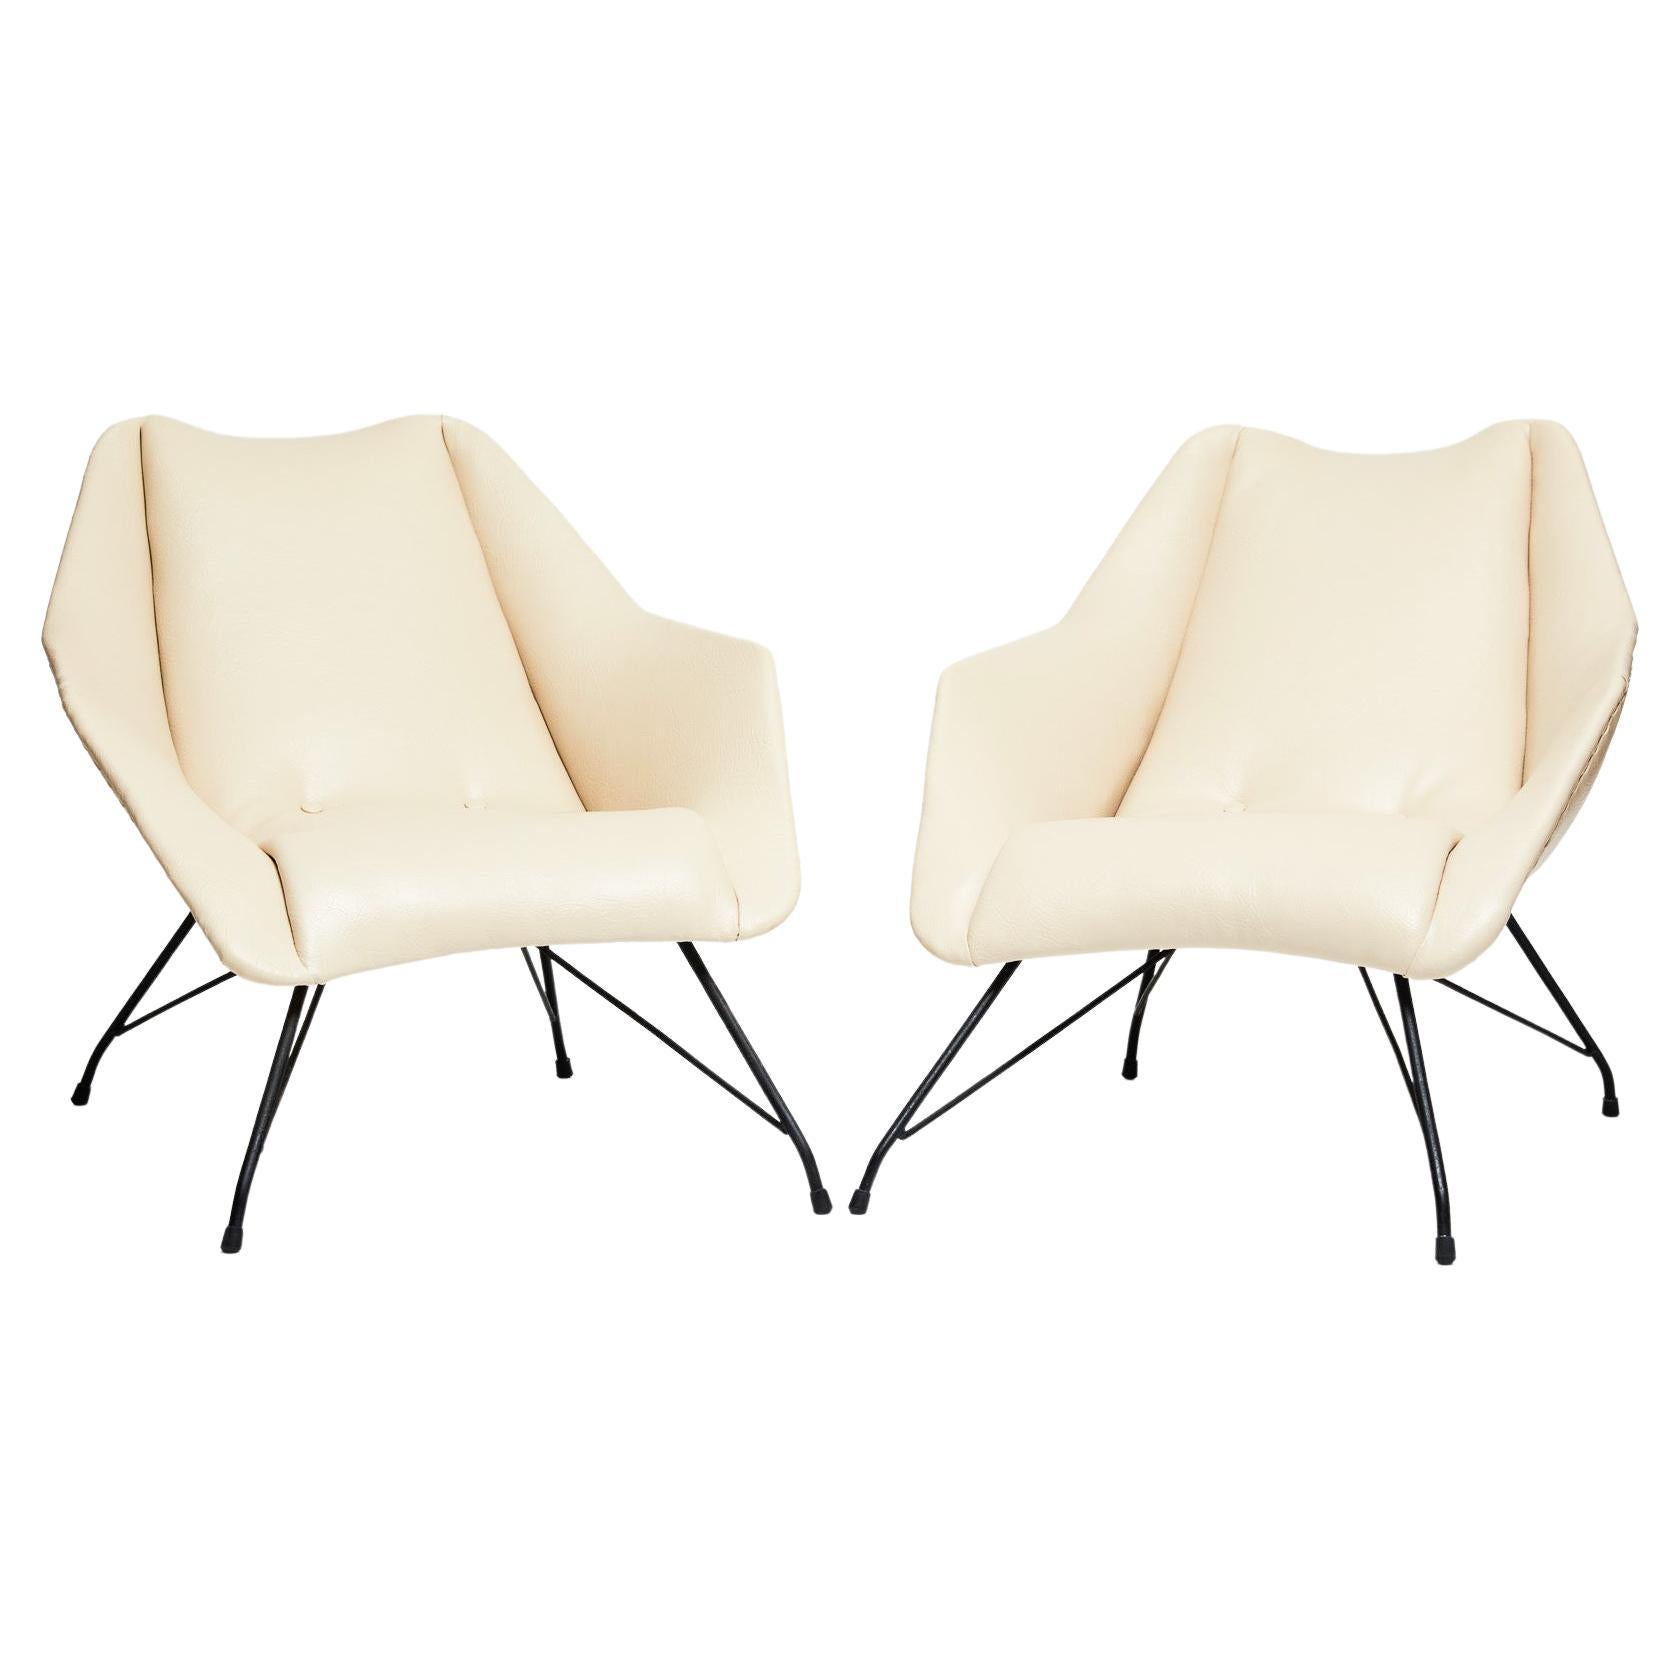 Available now, these Brazilian Modern armchairs in white leather & iron, where designed by Carlo Hauner and manufactured by Forma Moveis in Brazil 1955 and are fabulous! The name of the model is “Concha” (“Shell” in Portuguese), as they resemble an